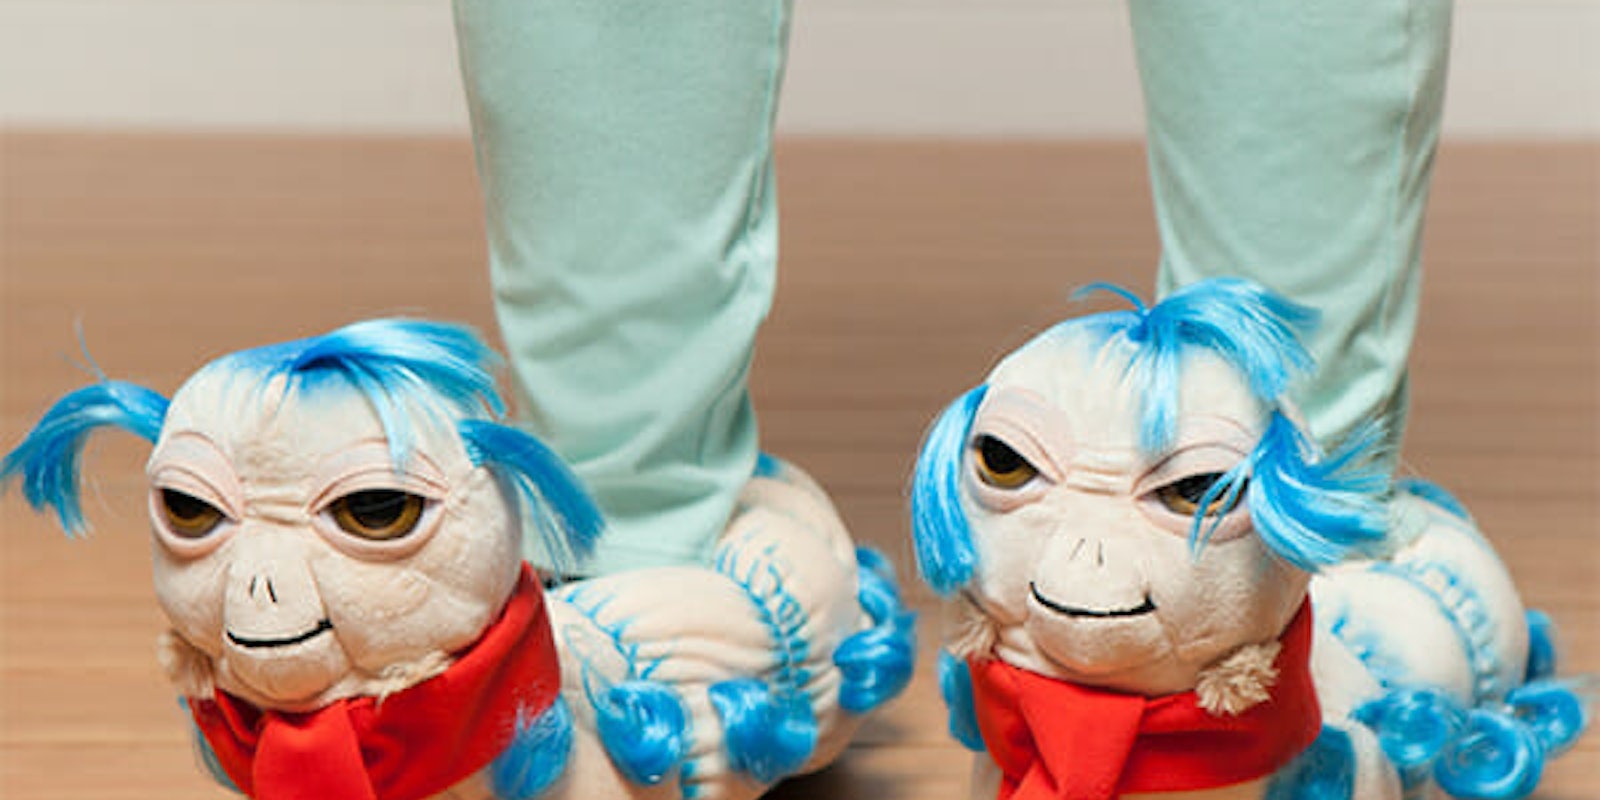 Labyrinth worm slippers